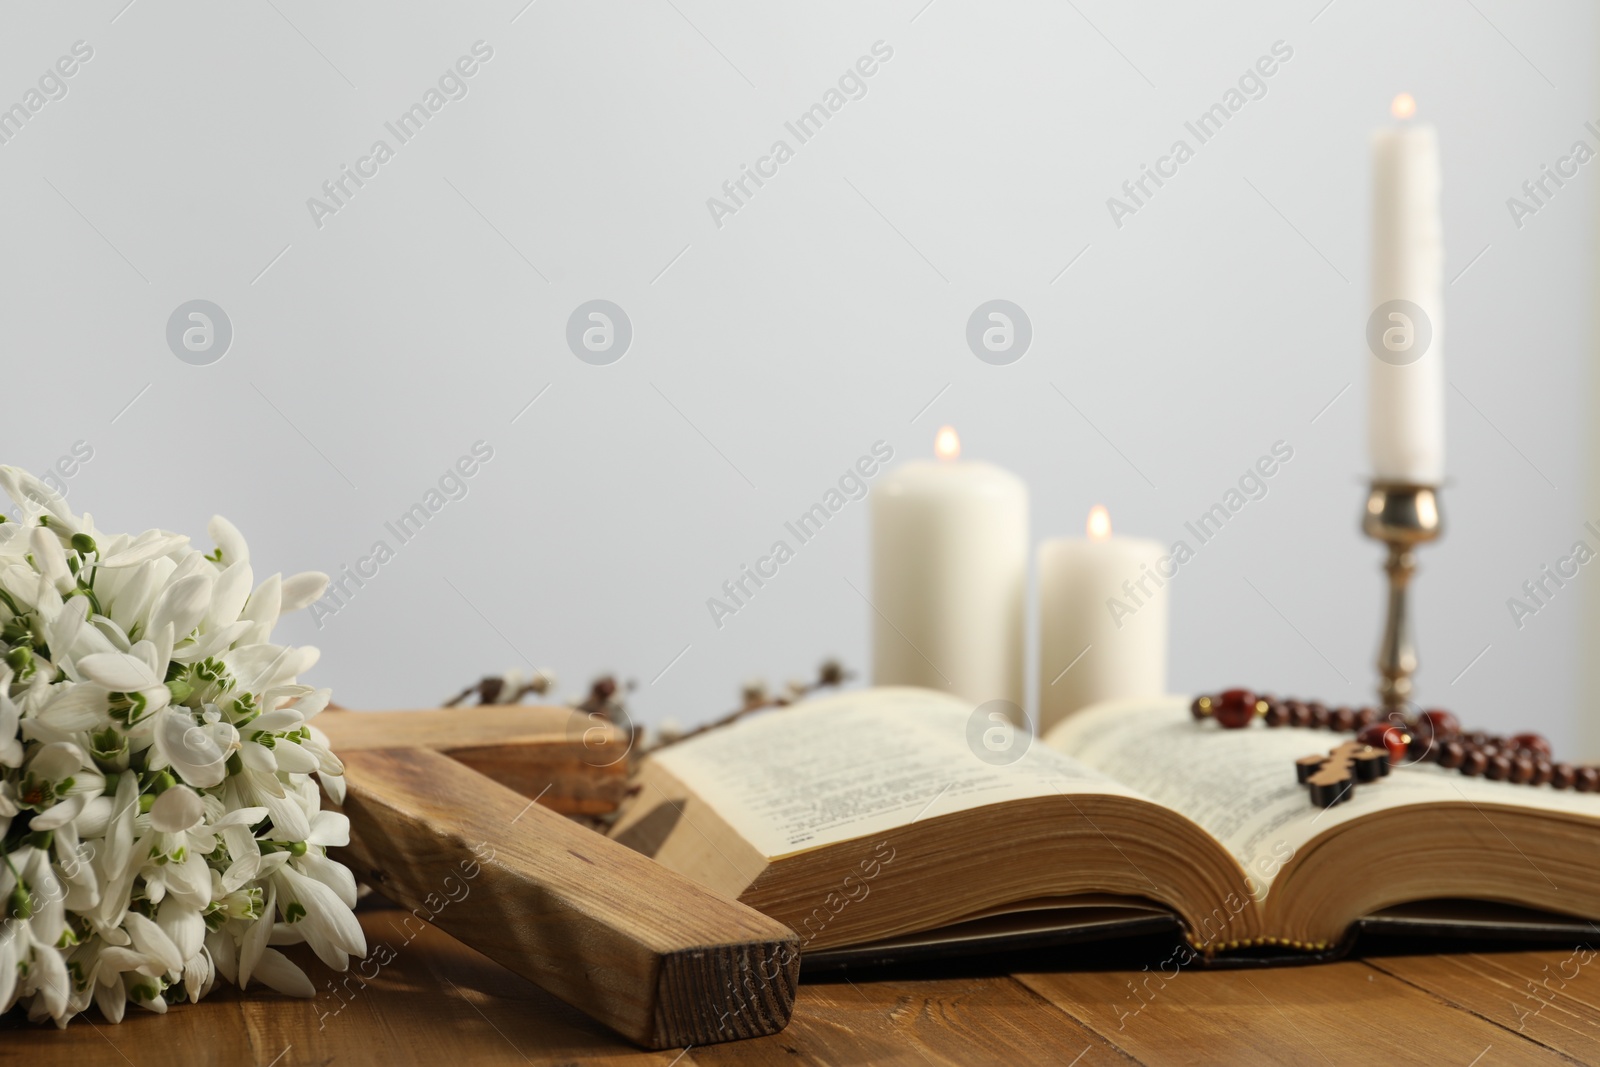 Photo of Church candles, cross, rosary beads, Bible and flowers on wooden table against light background